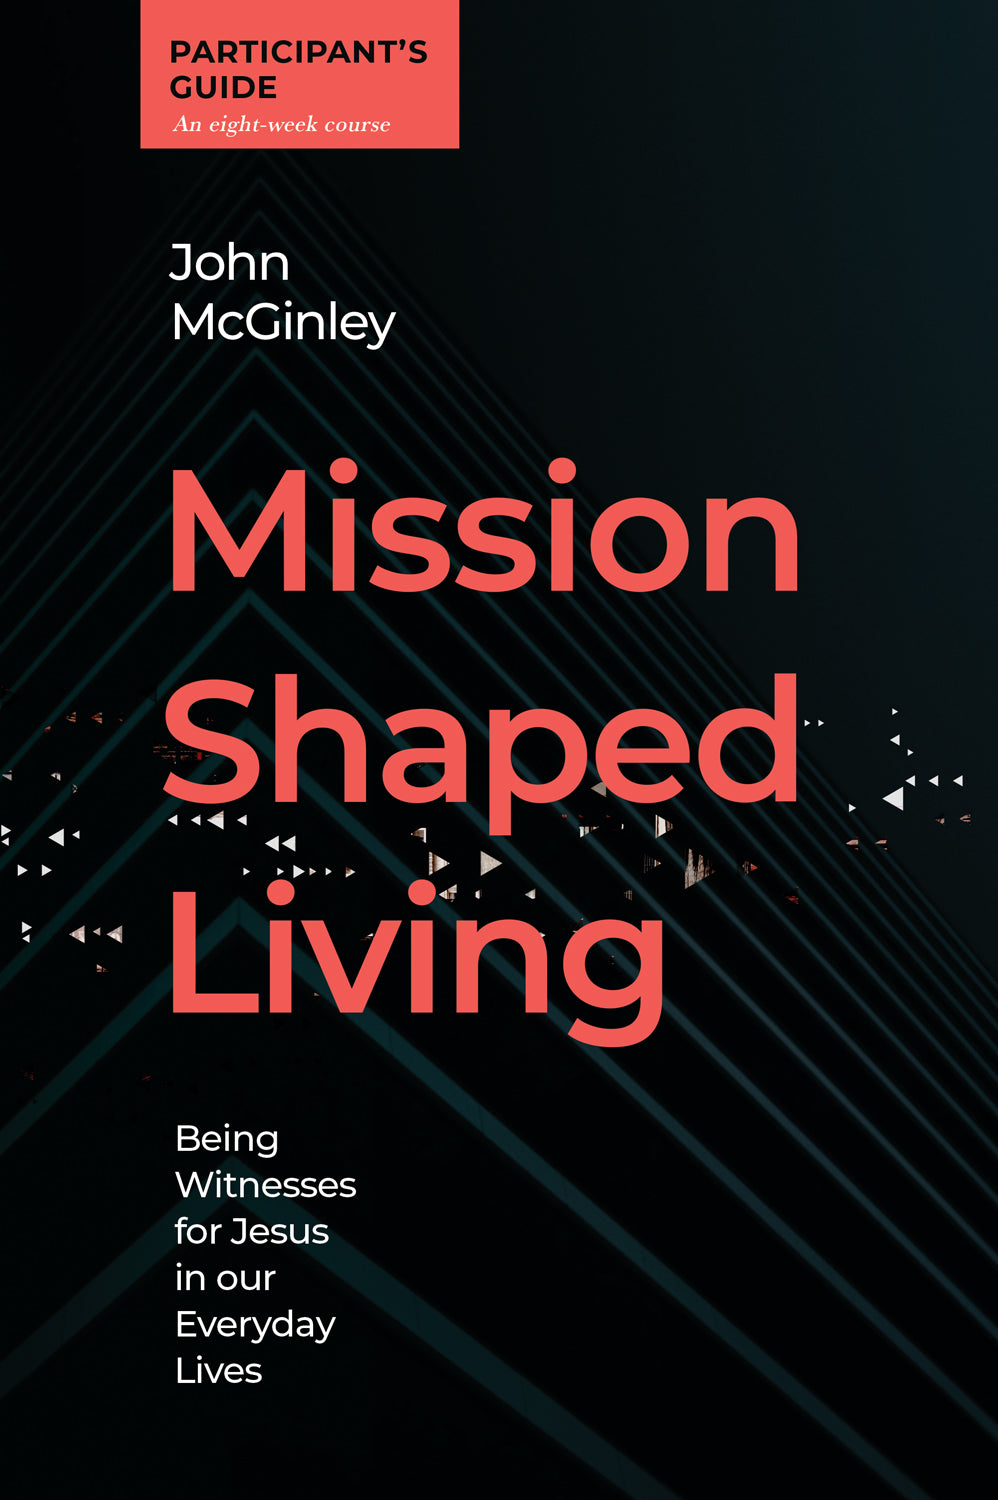 Image of Mission-Shaped Living Participant's Guide other